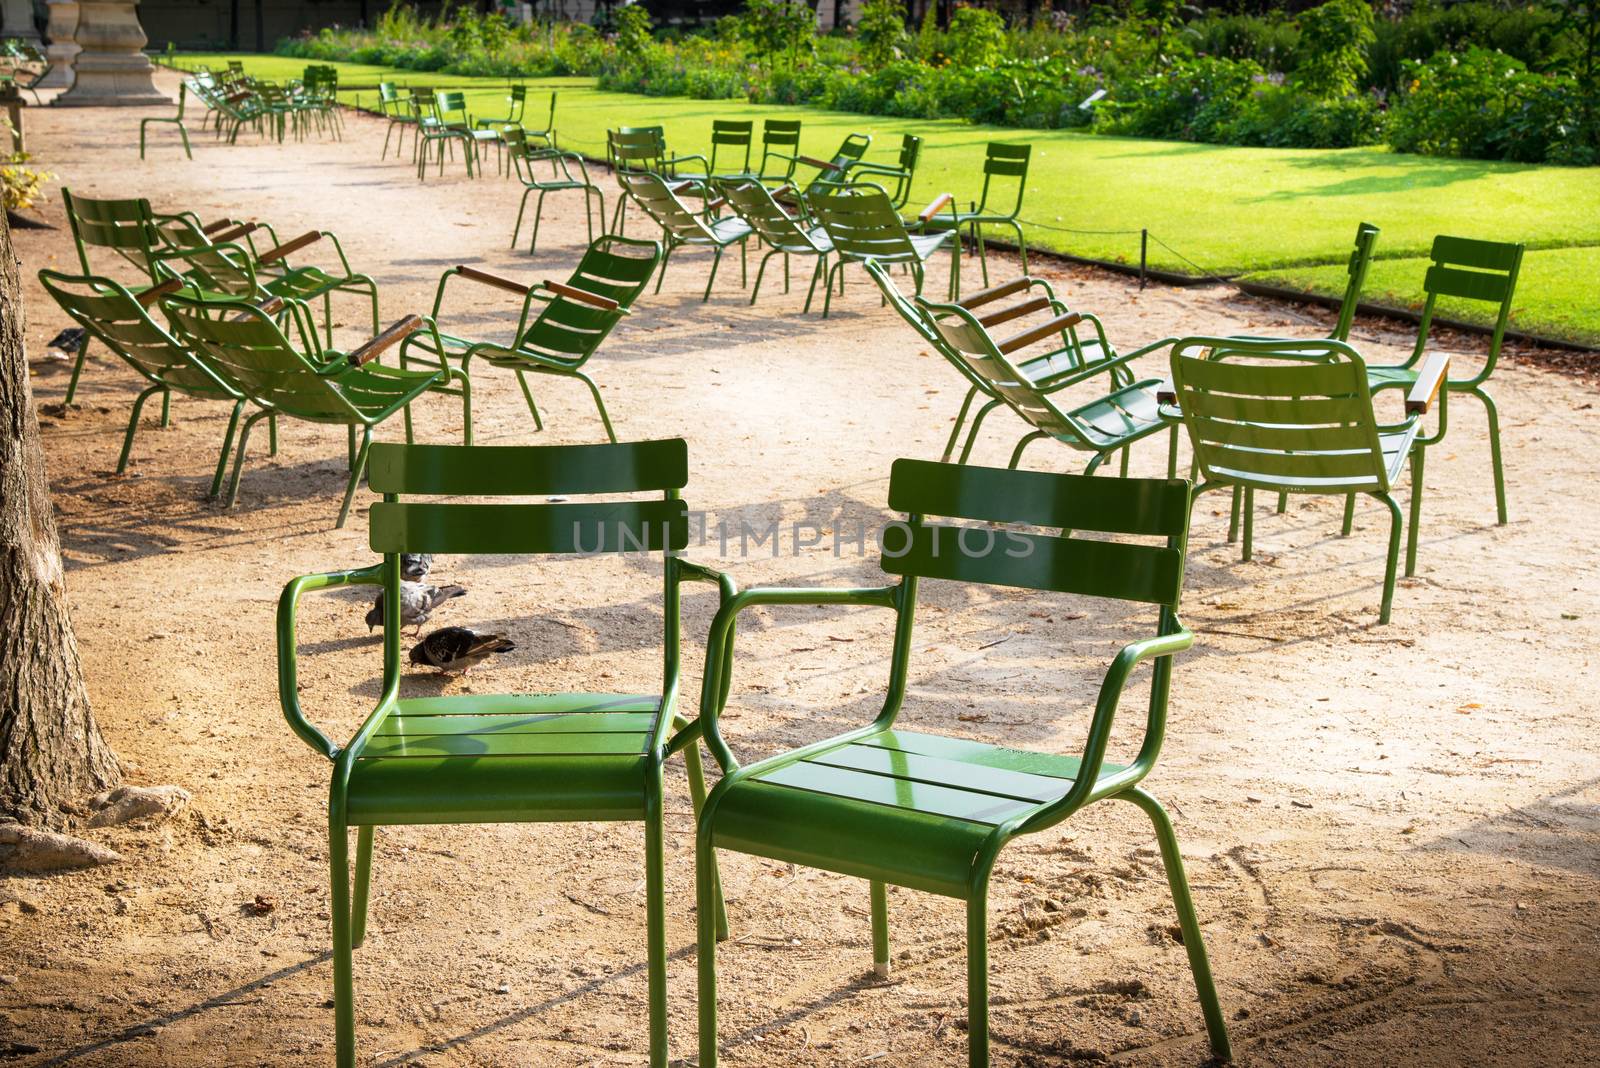 The chairs at the des Tuileries Gardens in Paris